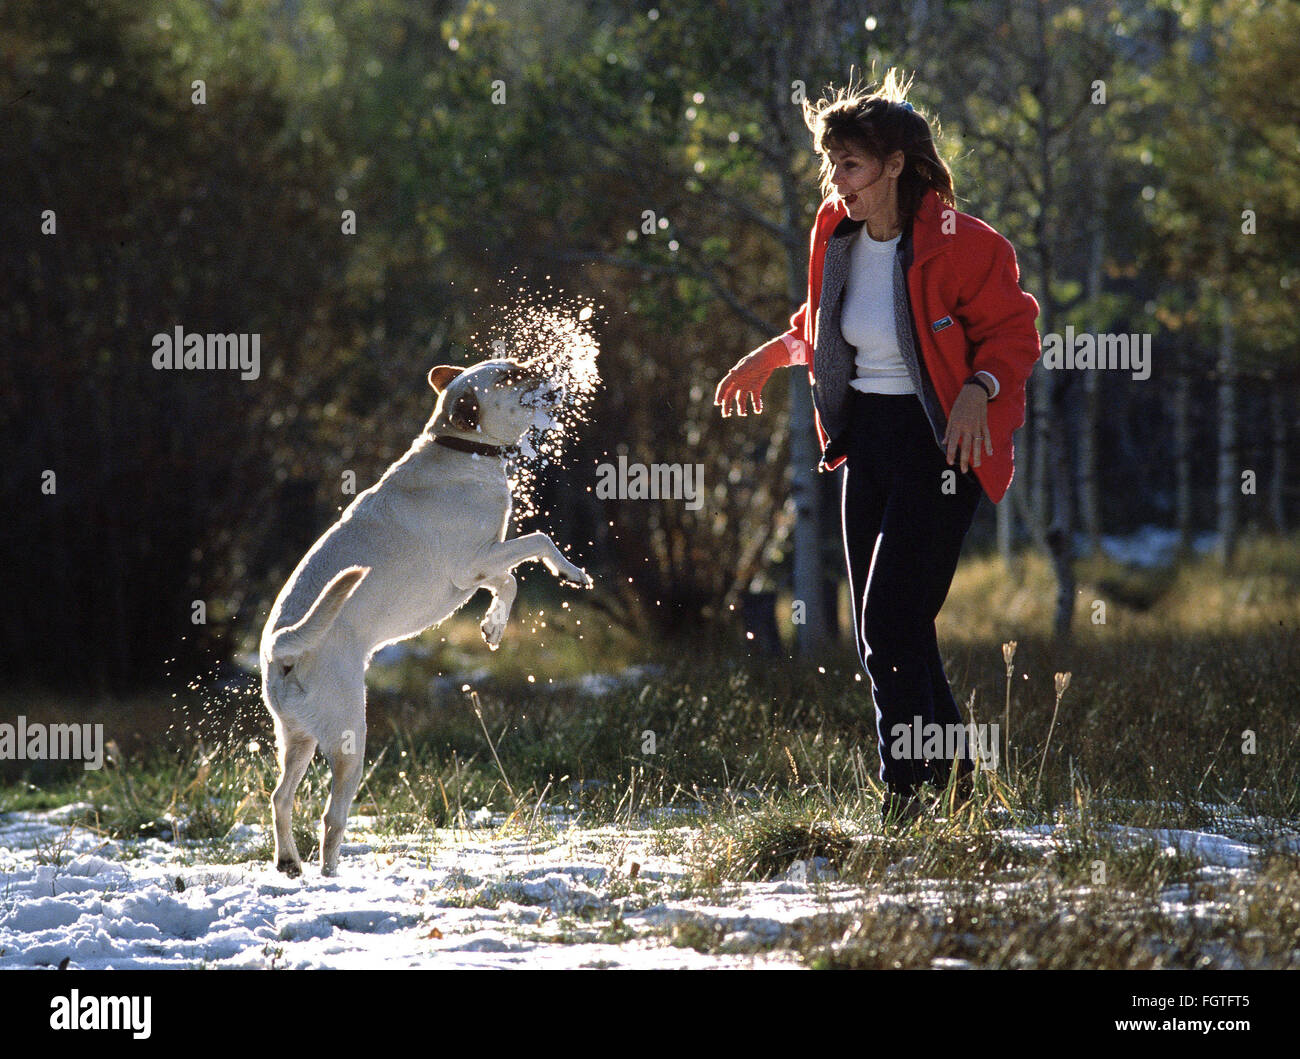 Feb. 22, 2016 - Mono County, California, U.S - The Labrador retriever is America's most popular dog breed for the 25th consecutive year, the American Kennel Club announced Monday. FILE 1991  Buck leaps up to catch a snowballs he plays in the snow with Cindy Roberts in a campground in the Eastern Sierra. Photographer Jebb Harris has been living with Labradors for over 25 years. (Credit Image: © Jebb Harris via ZUMA Wire) Stock Photo